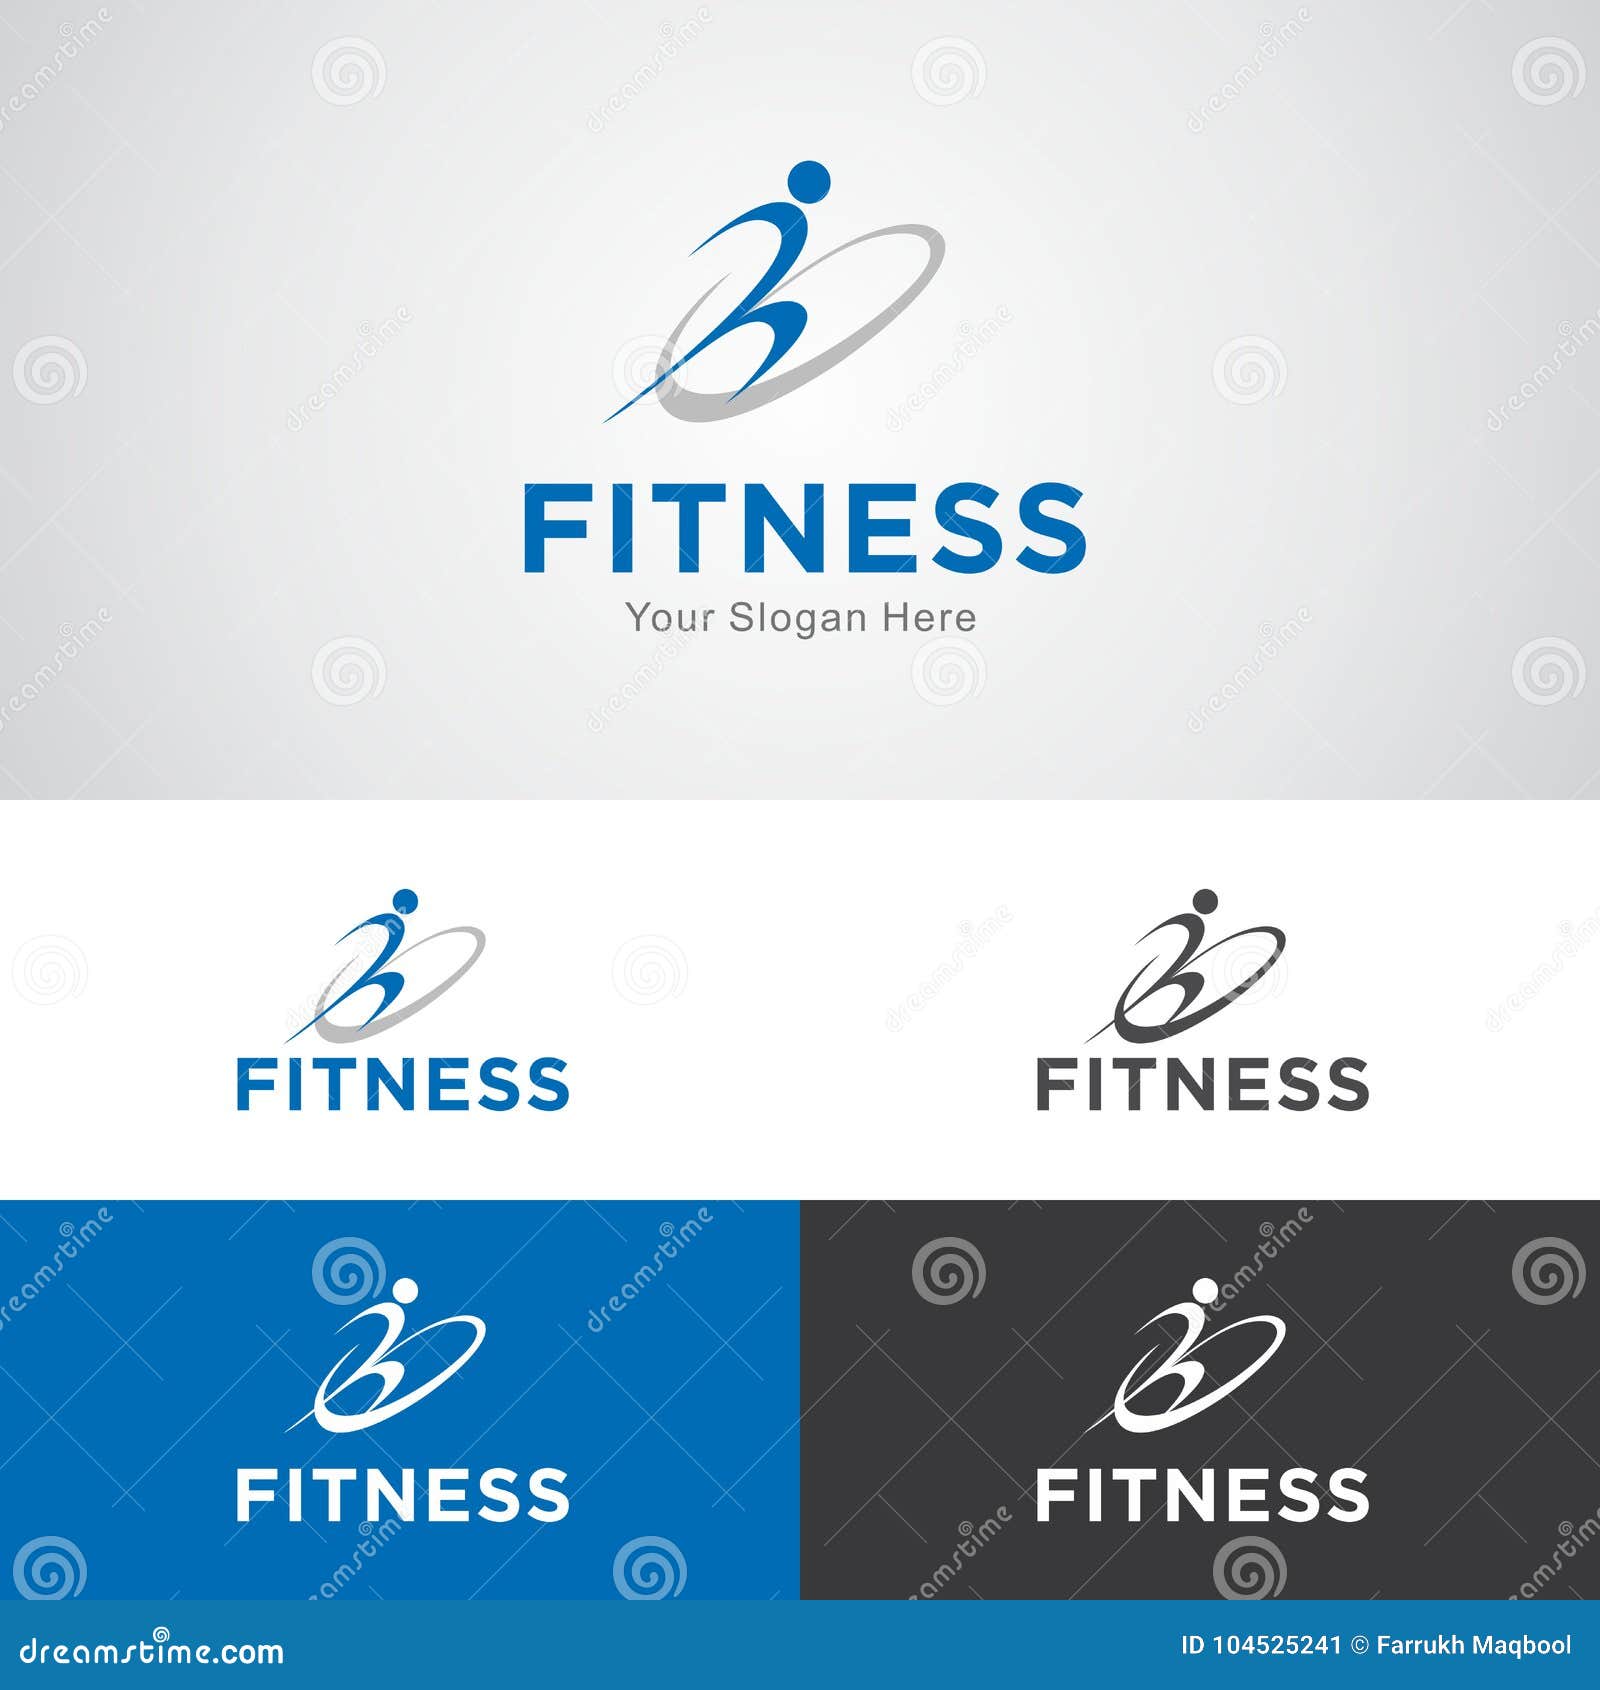 Fitness And Sports Logo Stock Vector Illustration Of Business